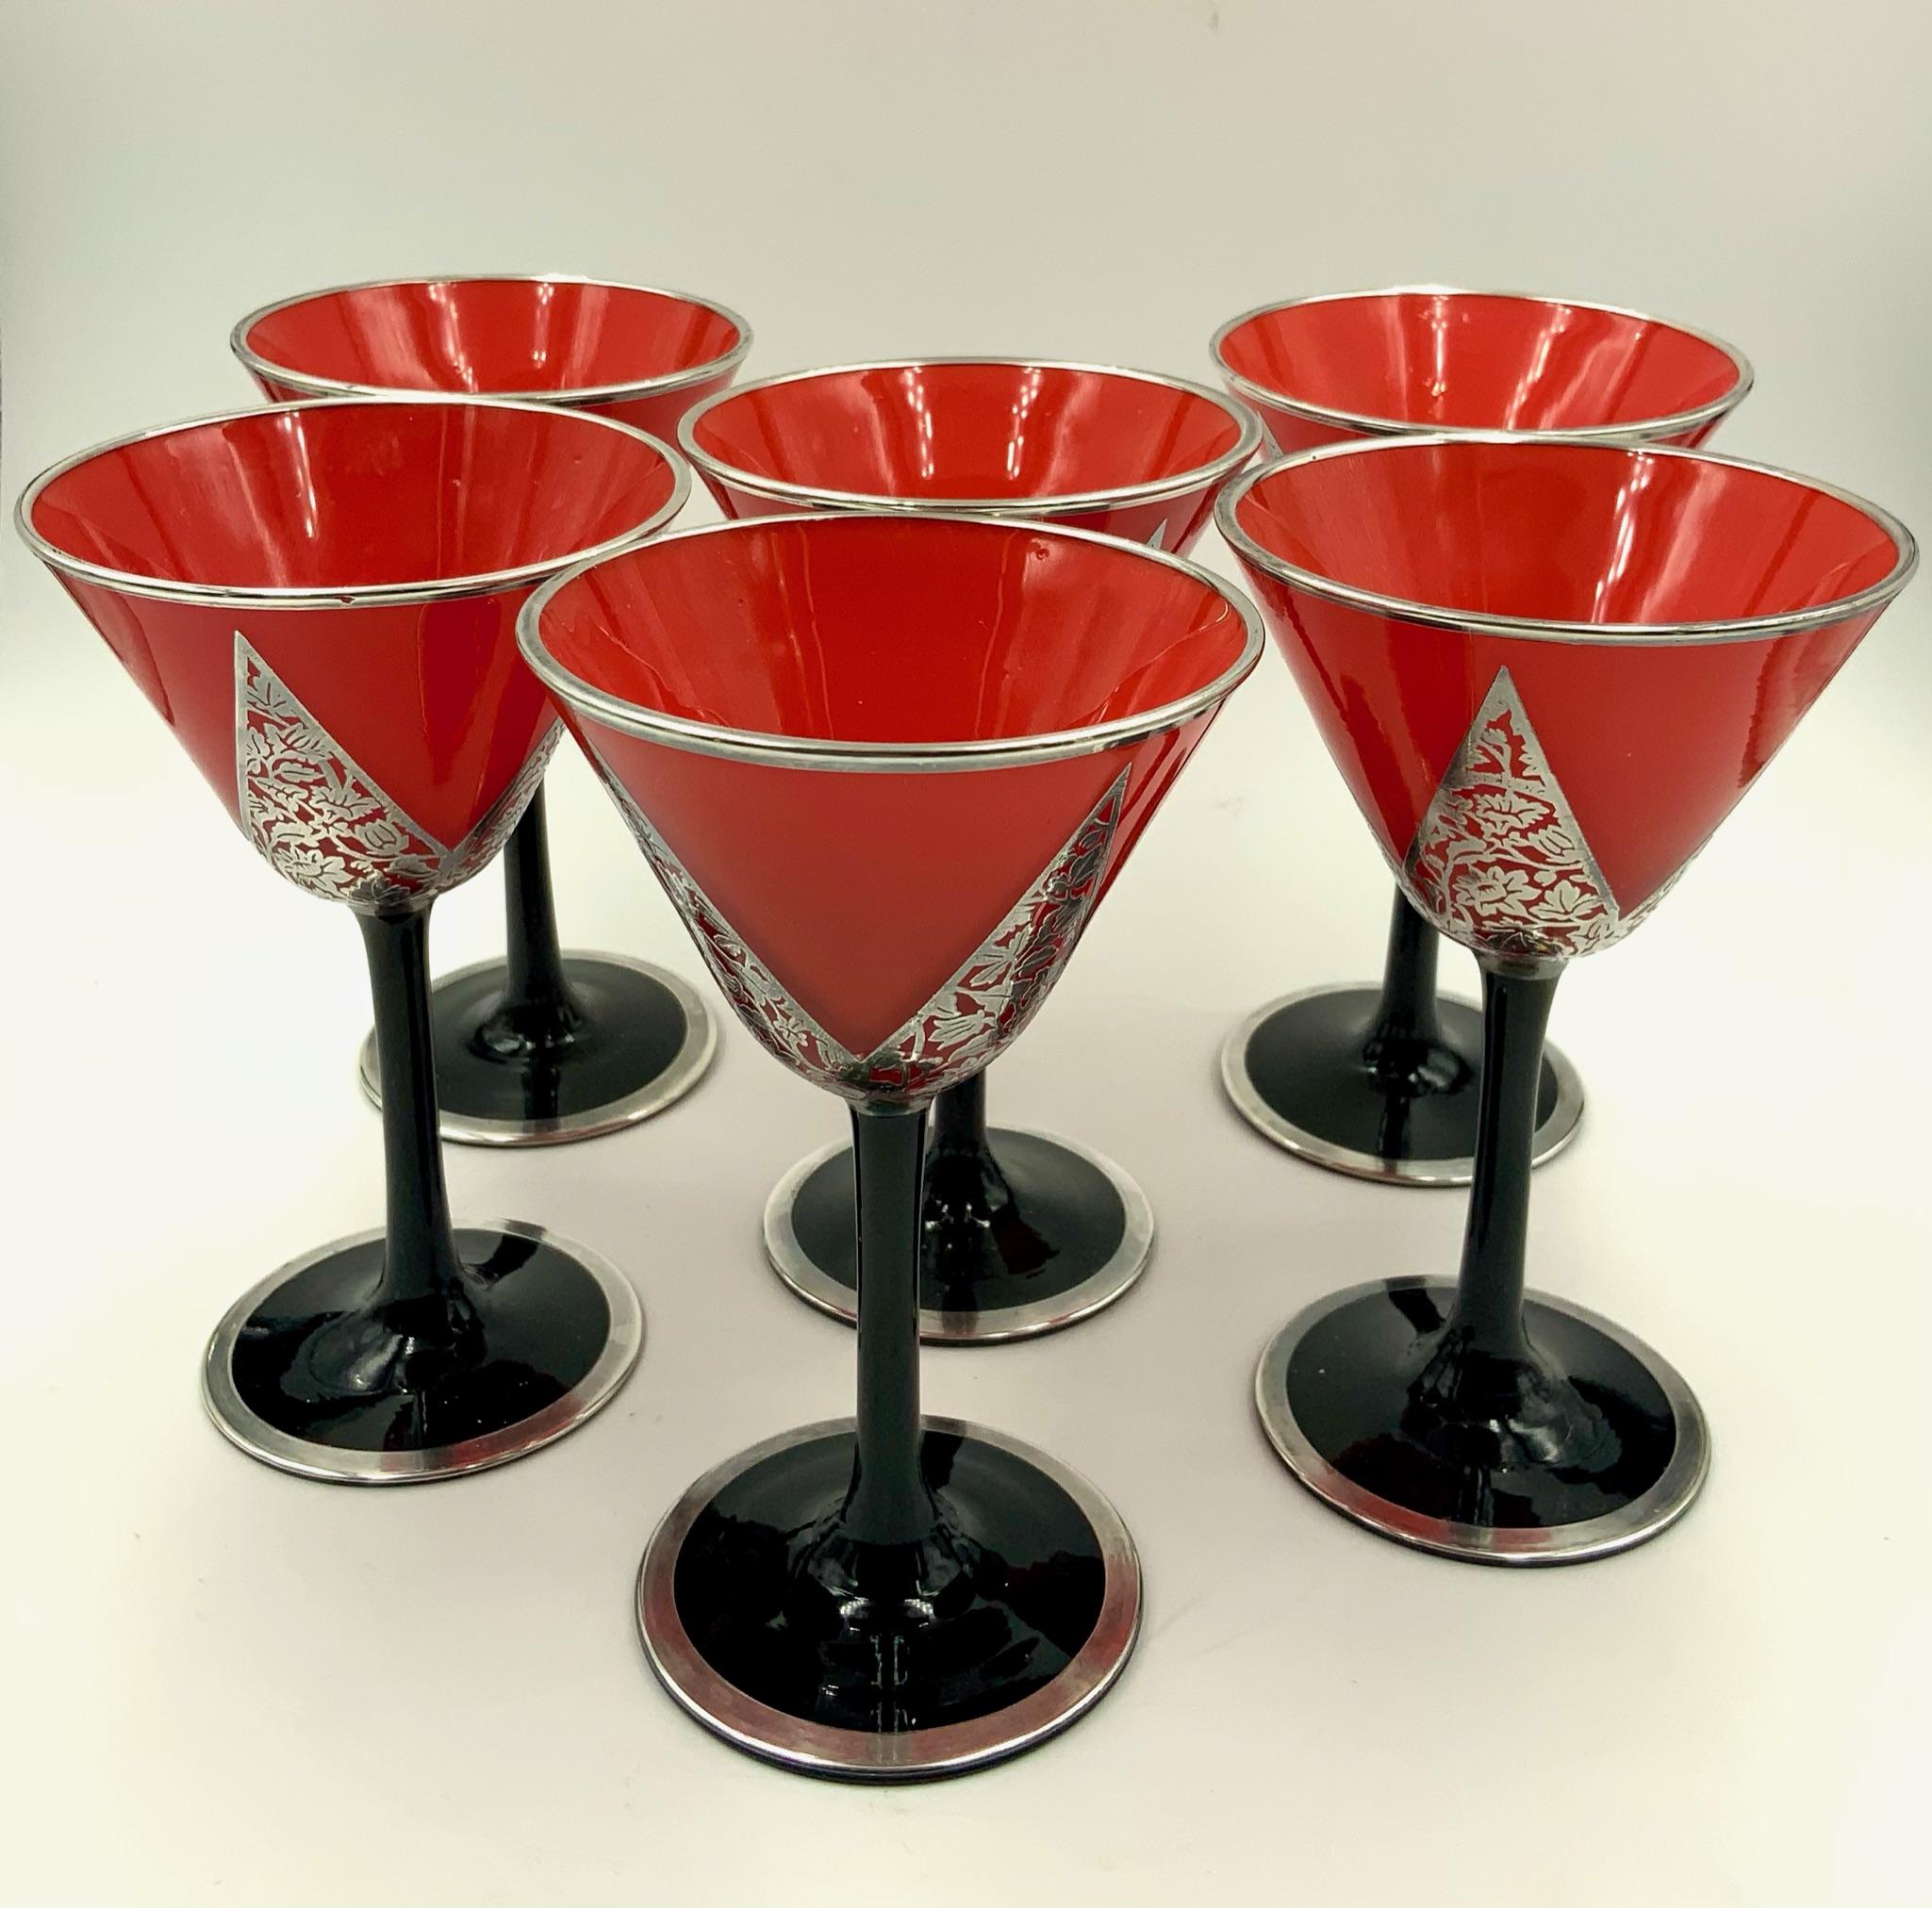 American Art Deco Rockwell Sterling Silver Overlay Orange and Black Wine Glass Set of Six